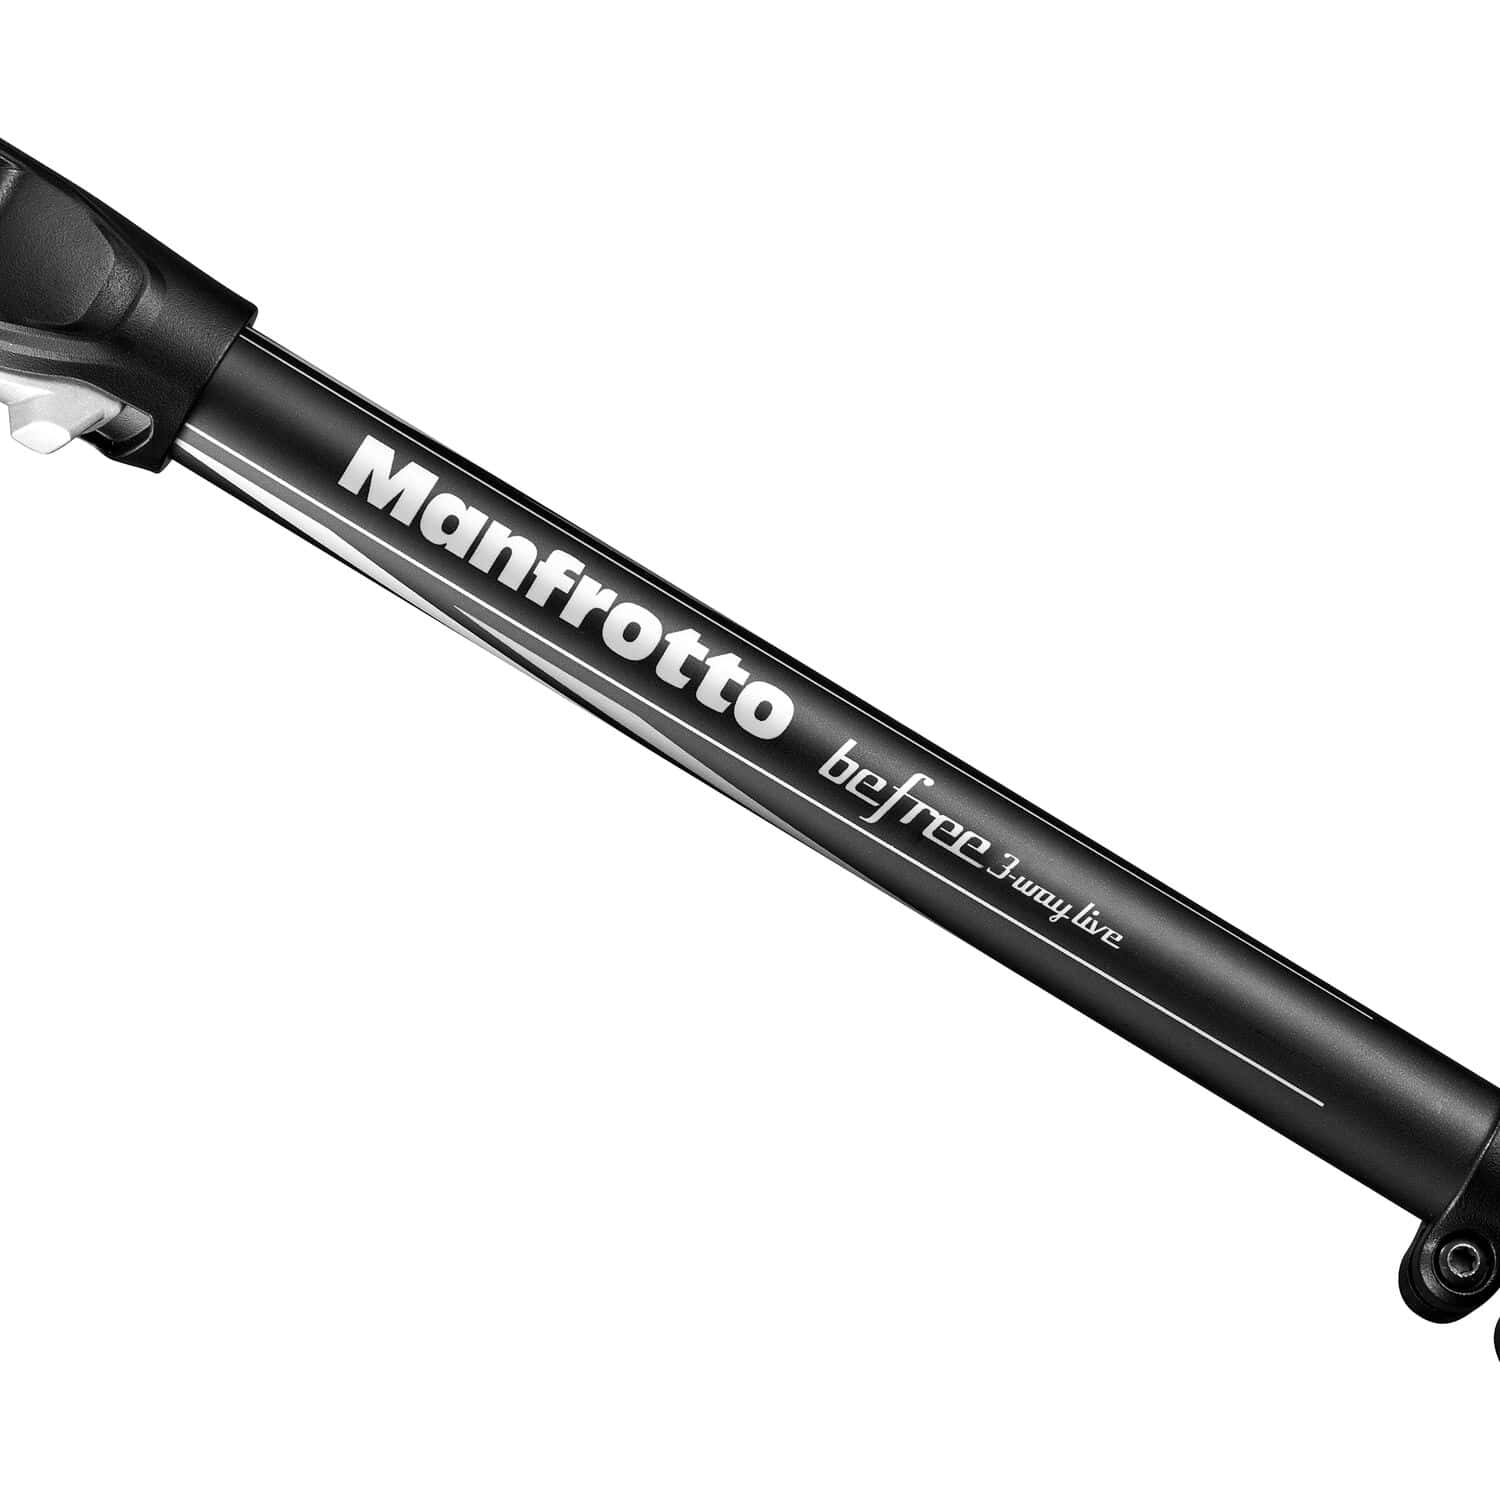 Manfrotto Beefree 3Way Live advanced